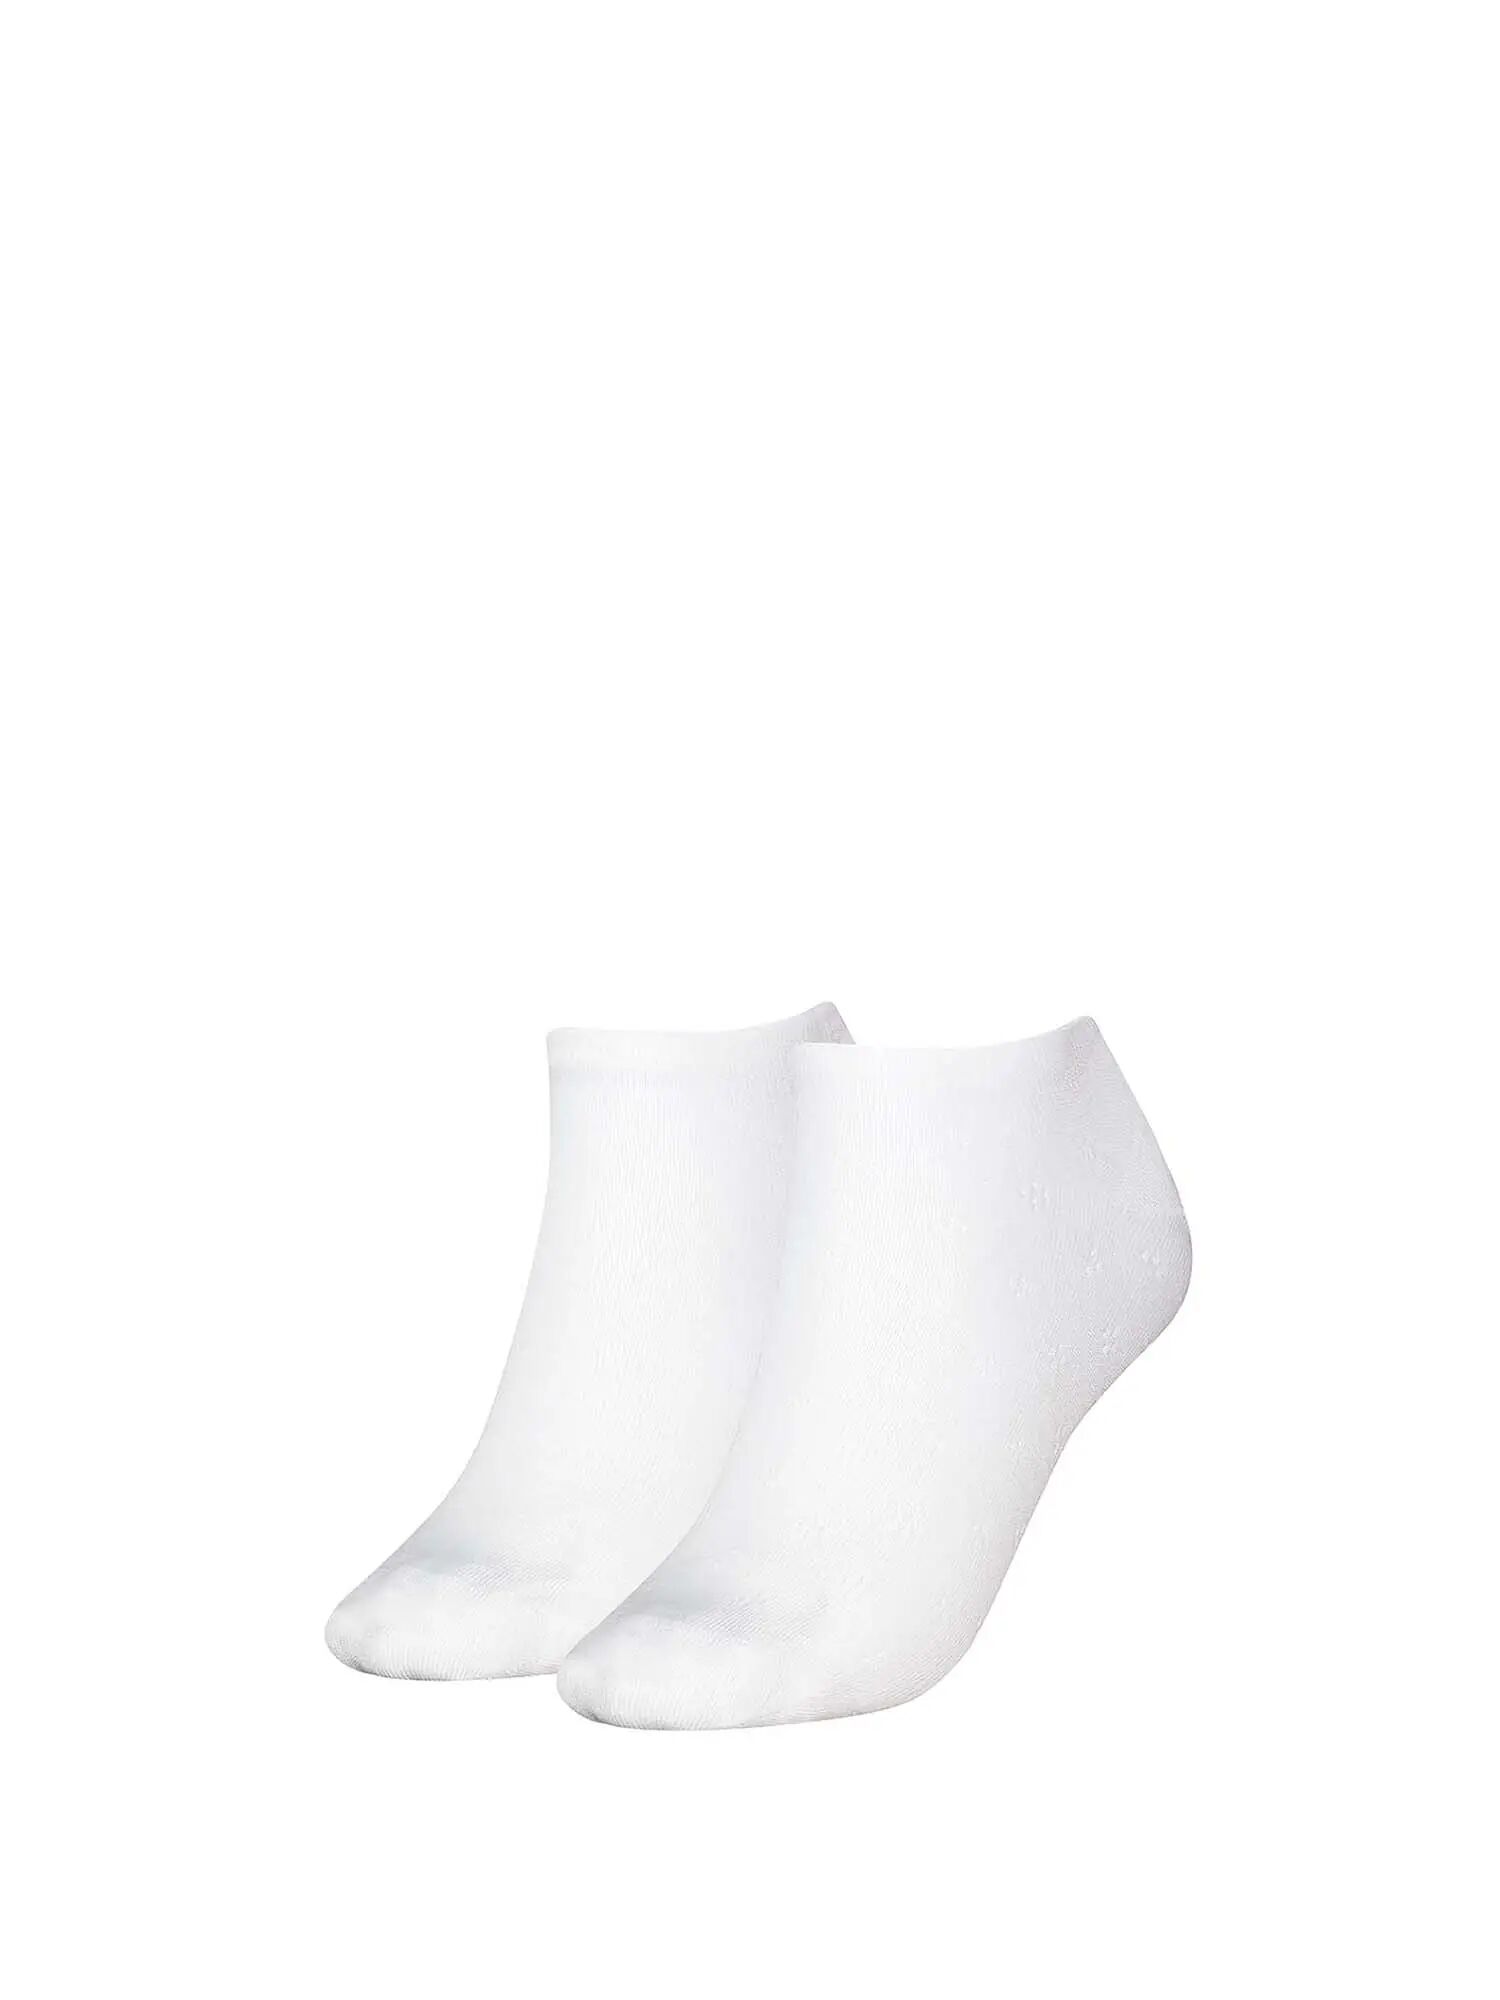 Tommy Hilfiger Calze Donna Colore Bianco BIANCO 39/42